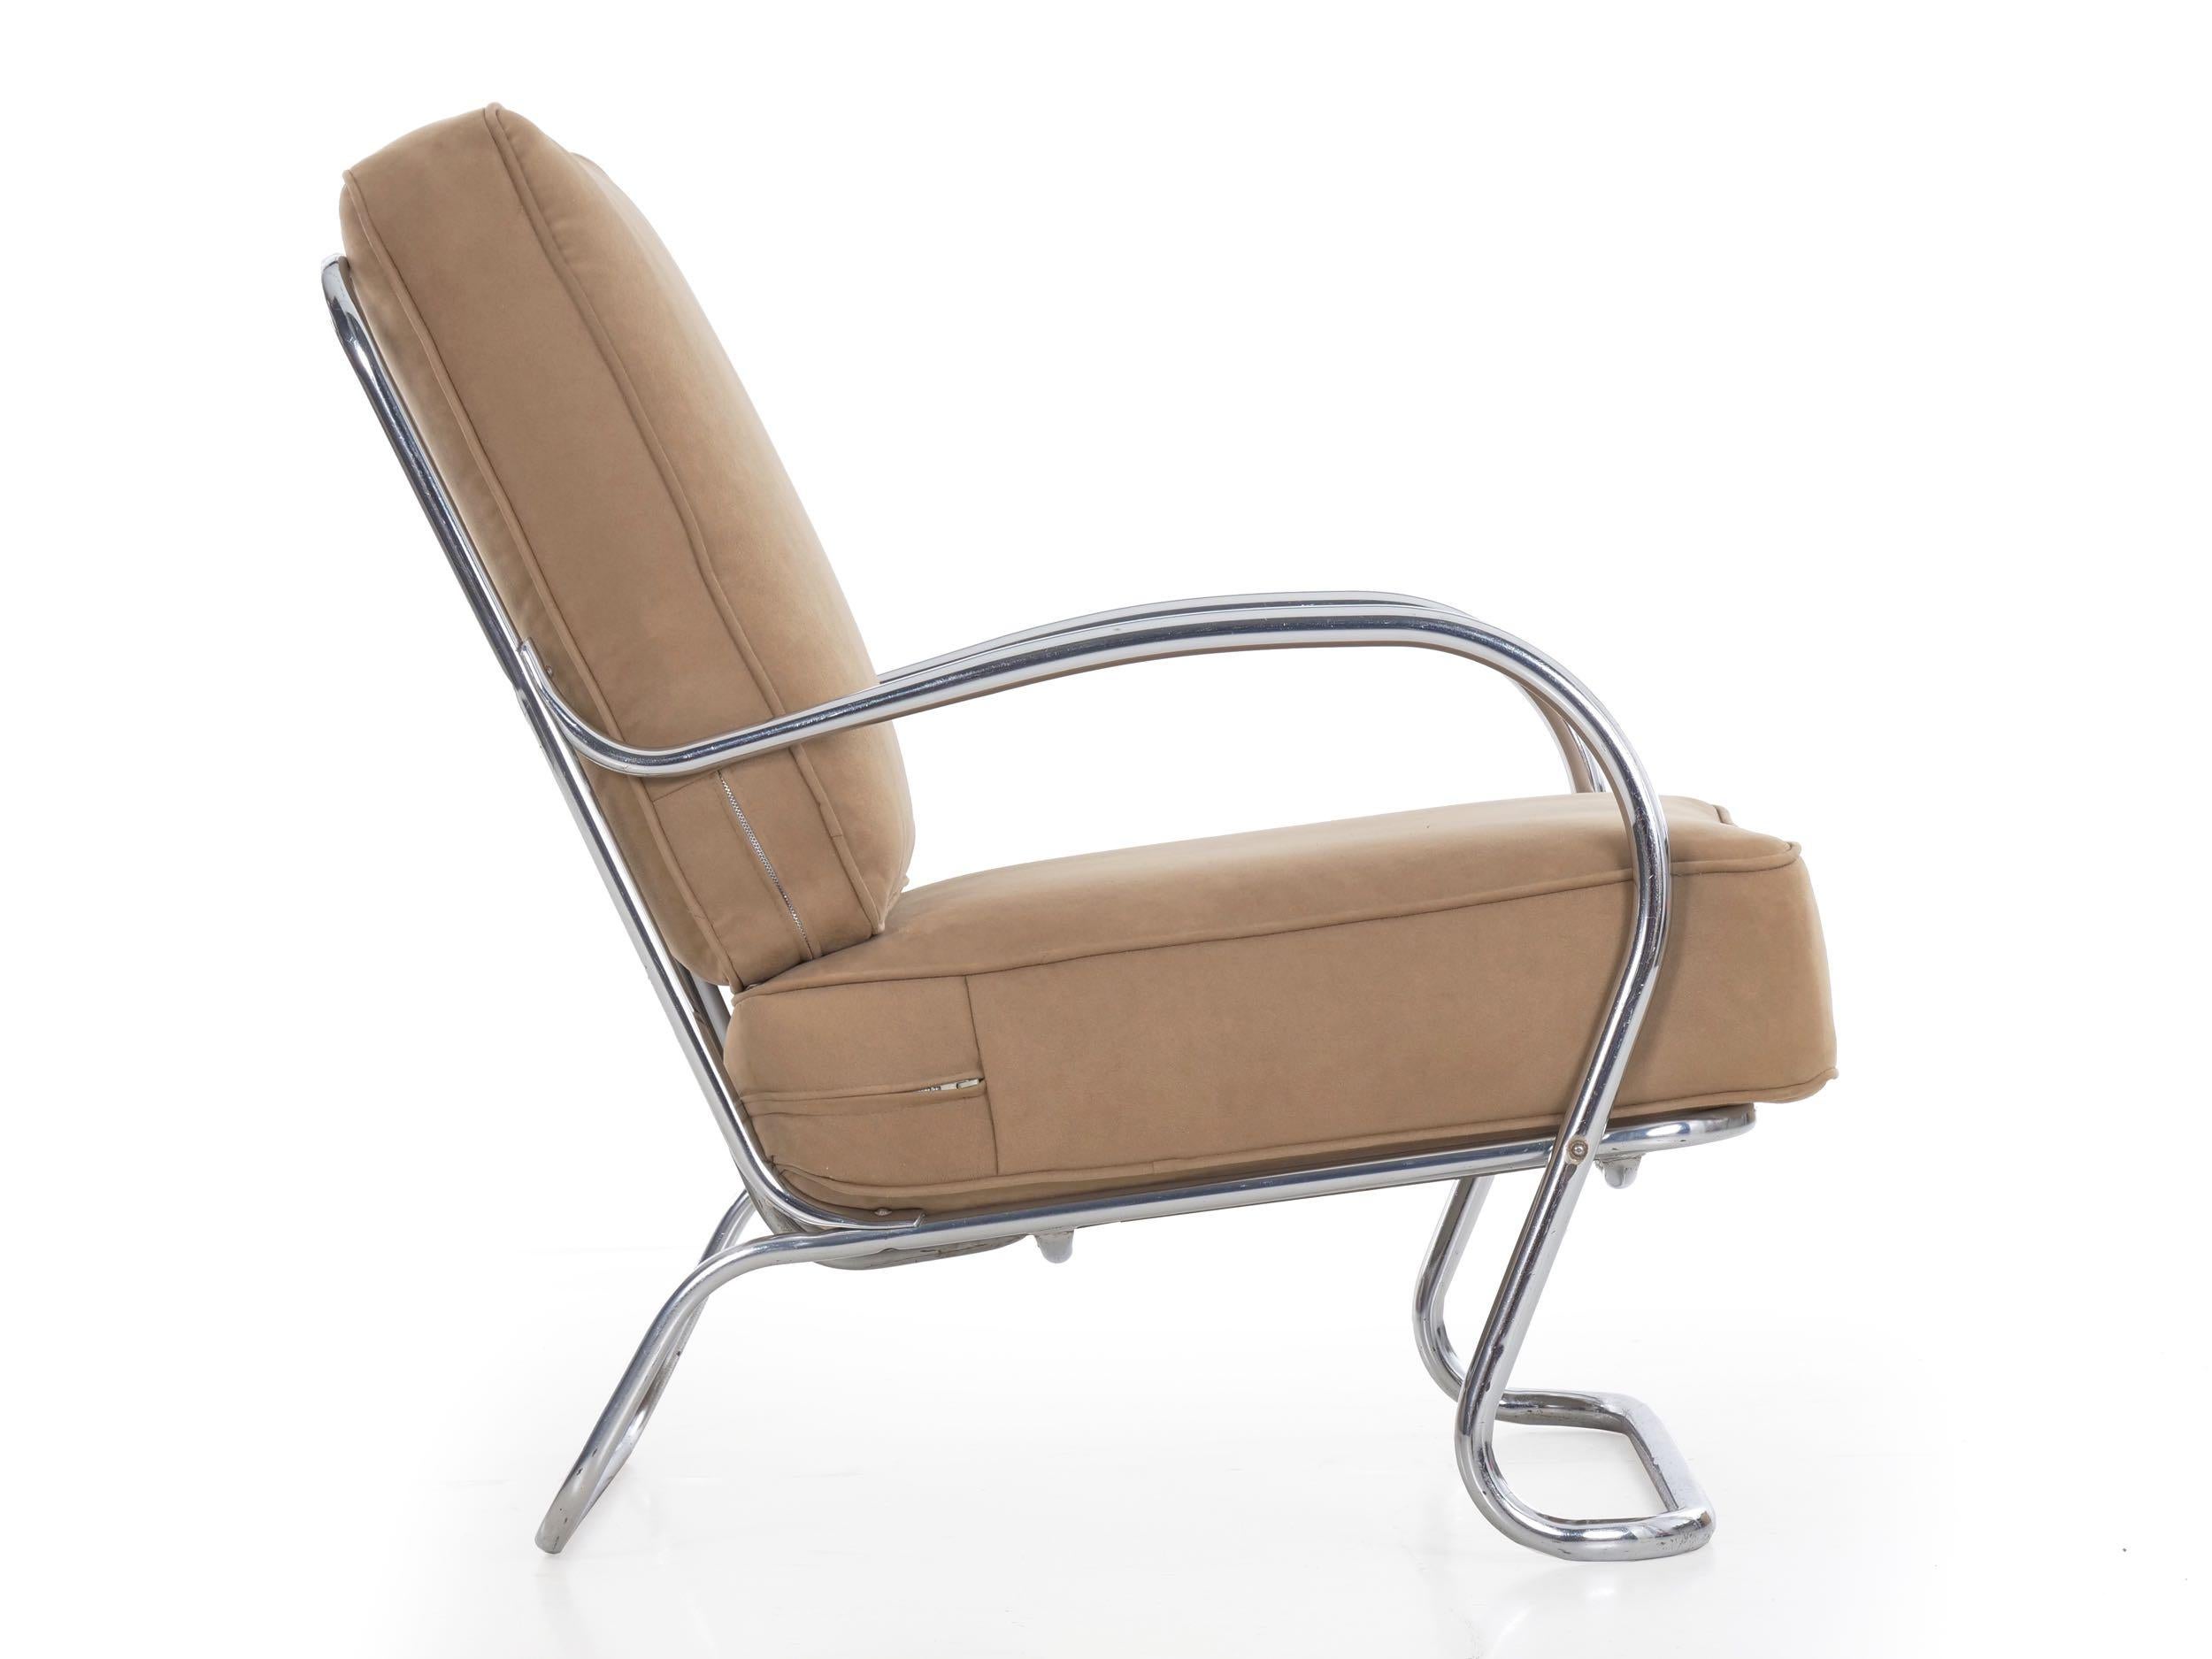 A delightful streamline Moderne lounge chair designed by KEM Weber and manufactured by Lloyd in the 1940s, it is a comfortable and striking seating piece. The beige suede upholstery is warm and deep, an attractive compliment against the strict and